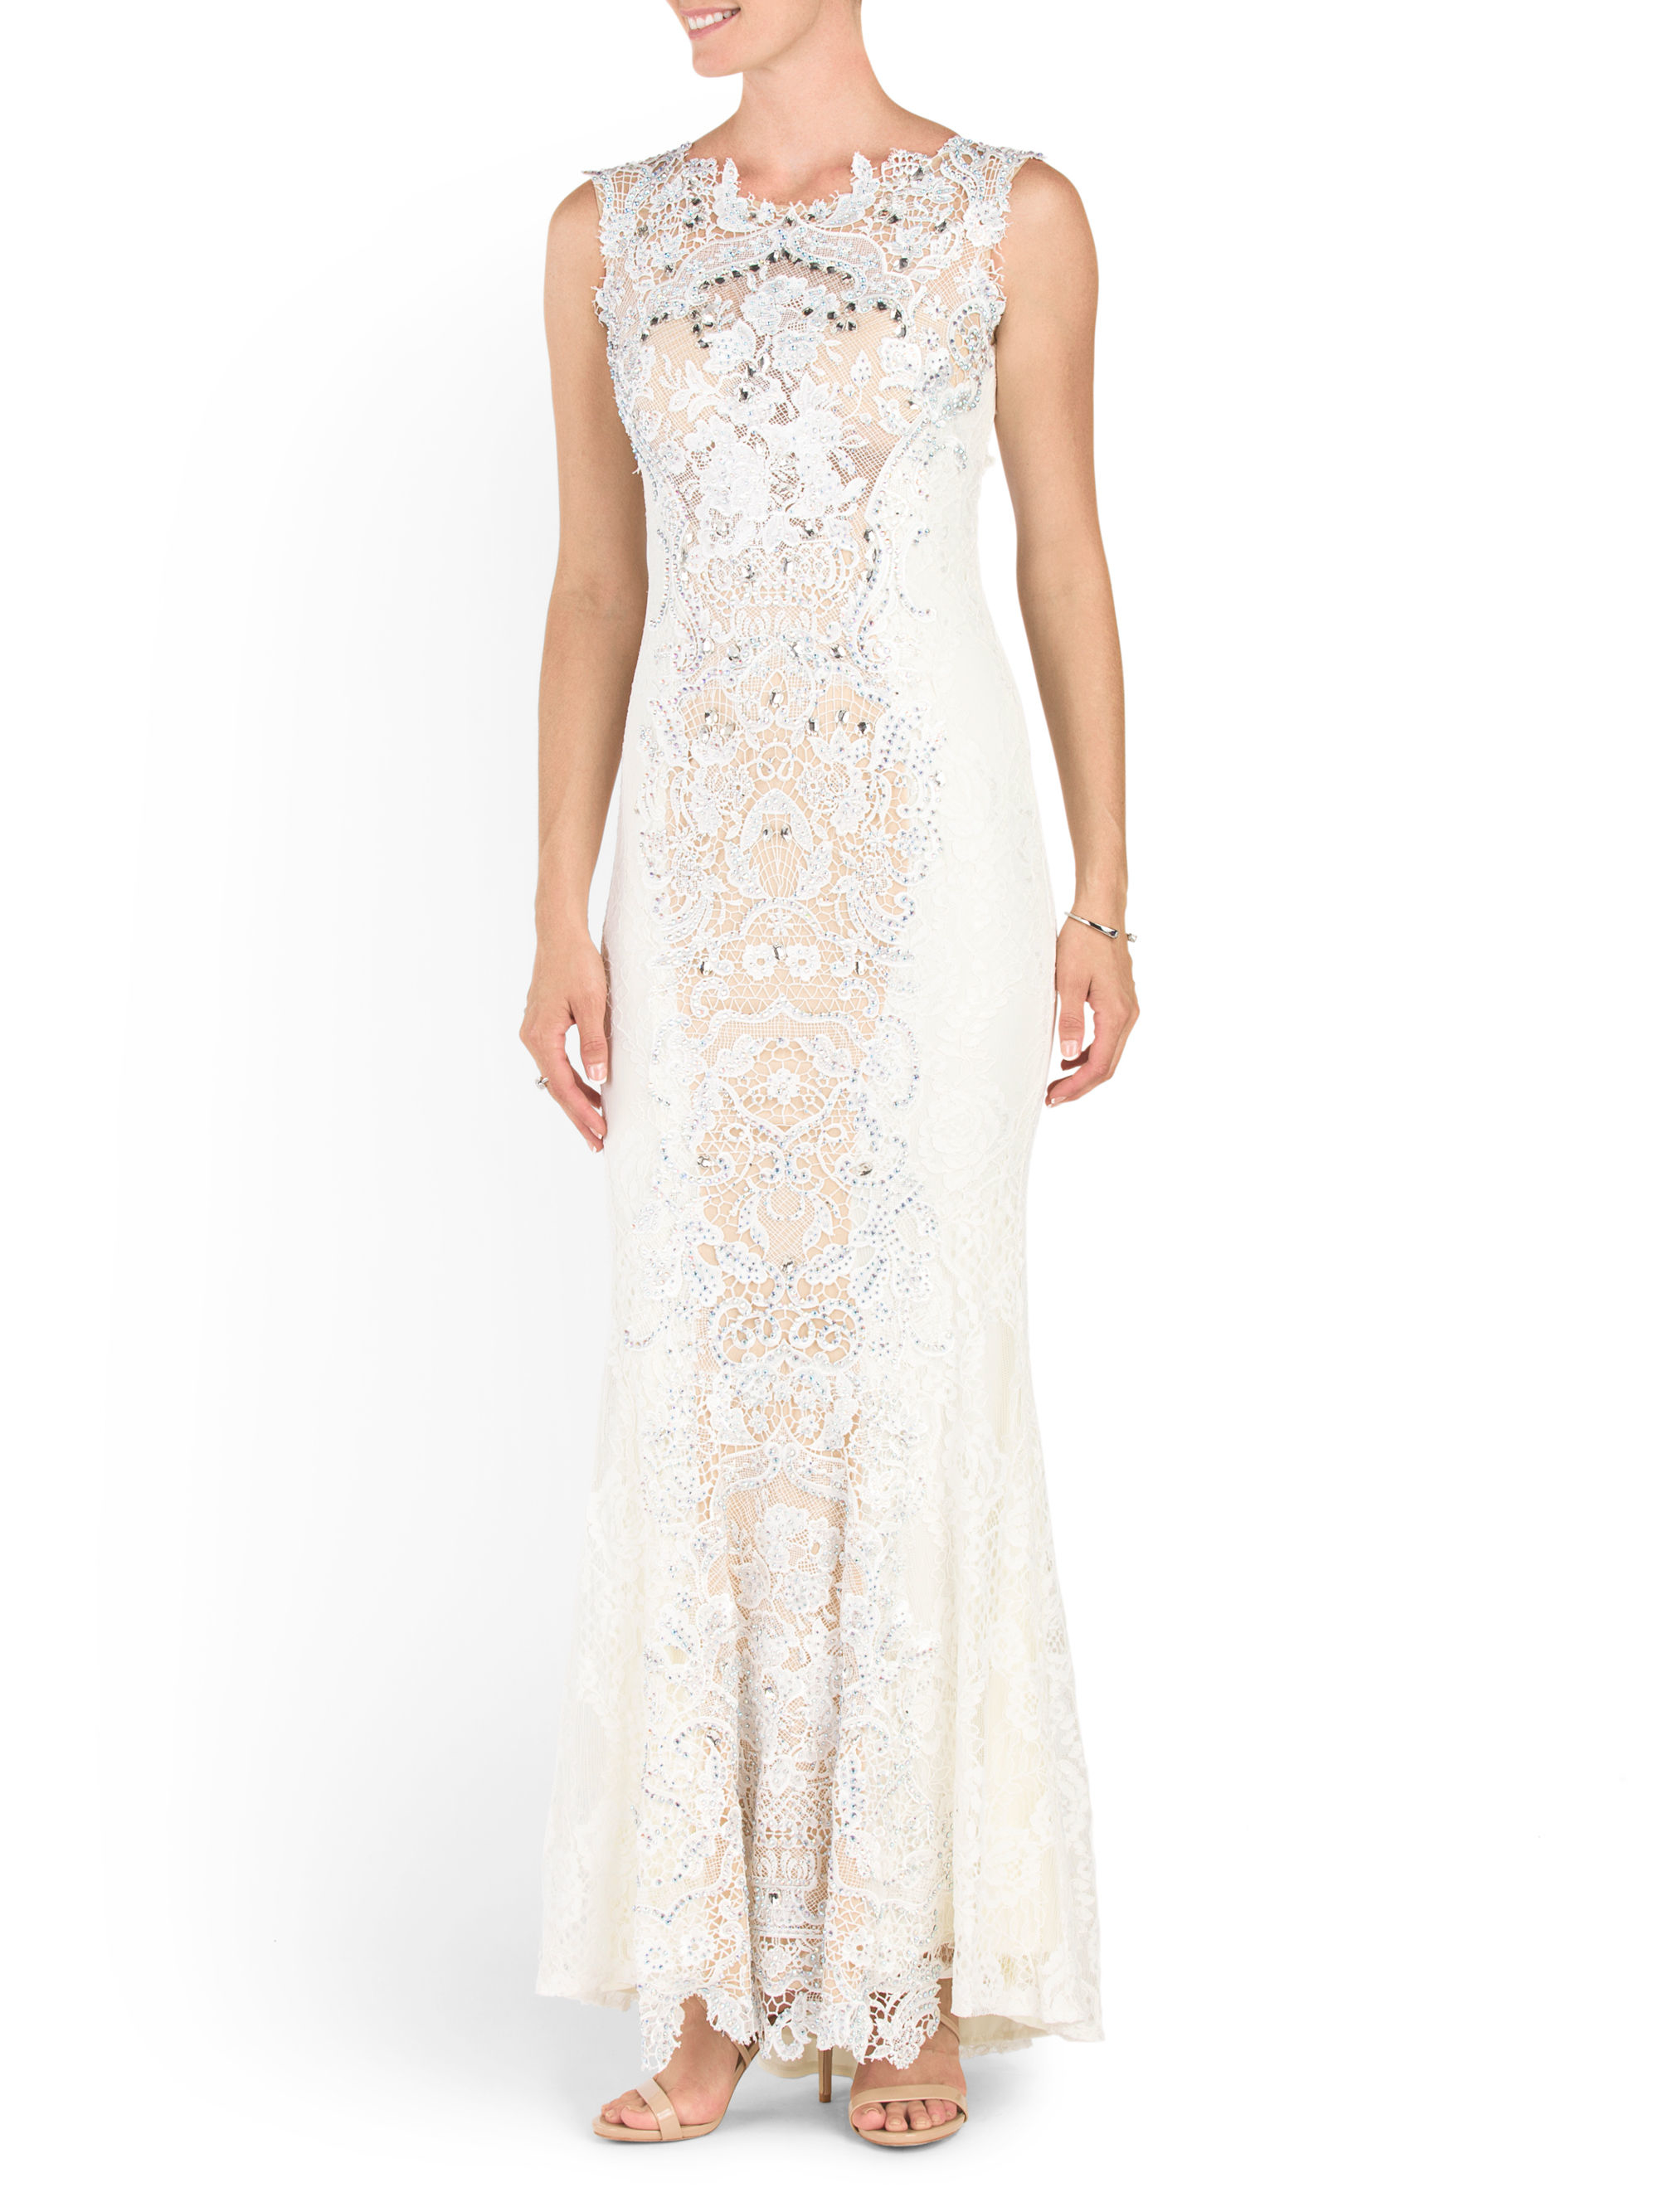 Lyst Tj Maxx Bridal Long Lace Gown in White